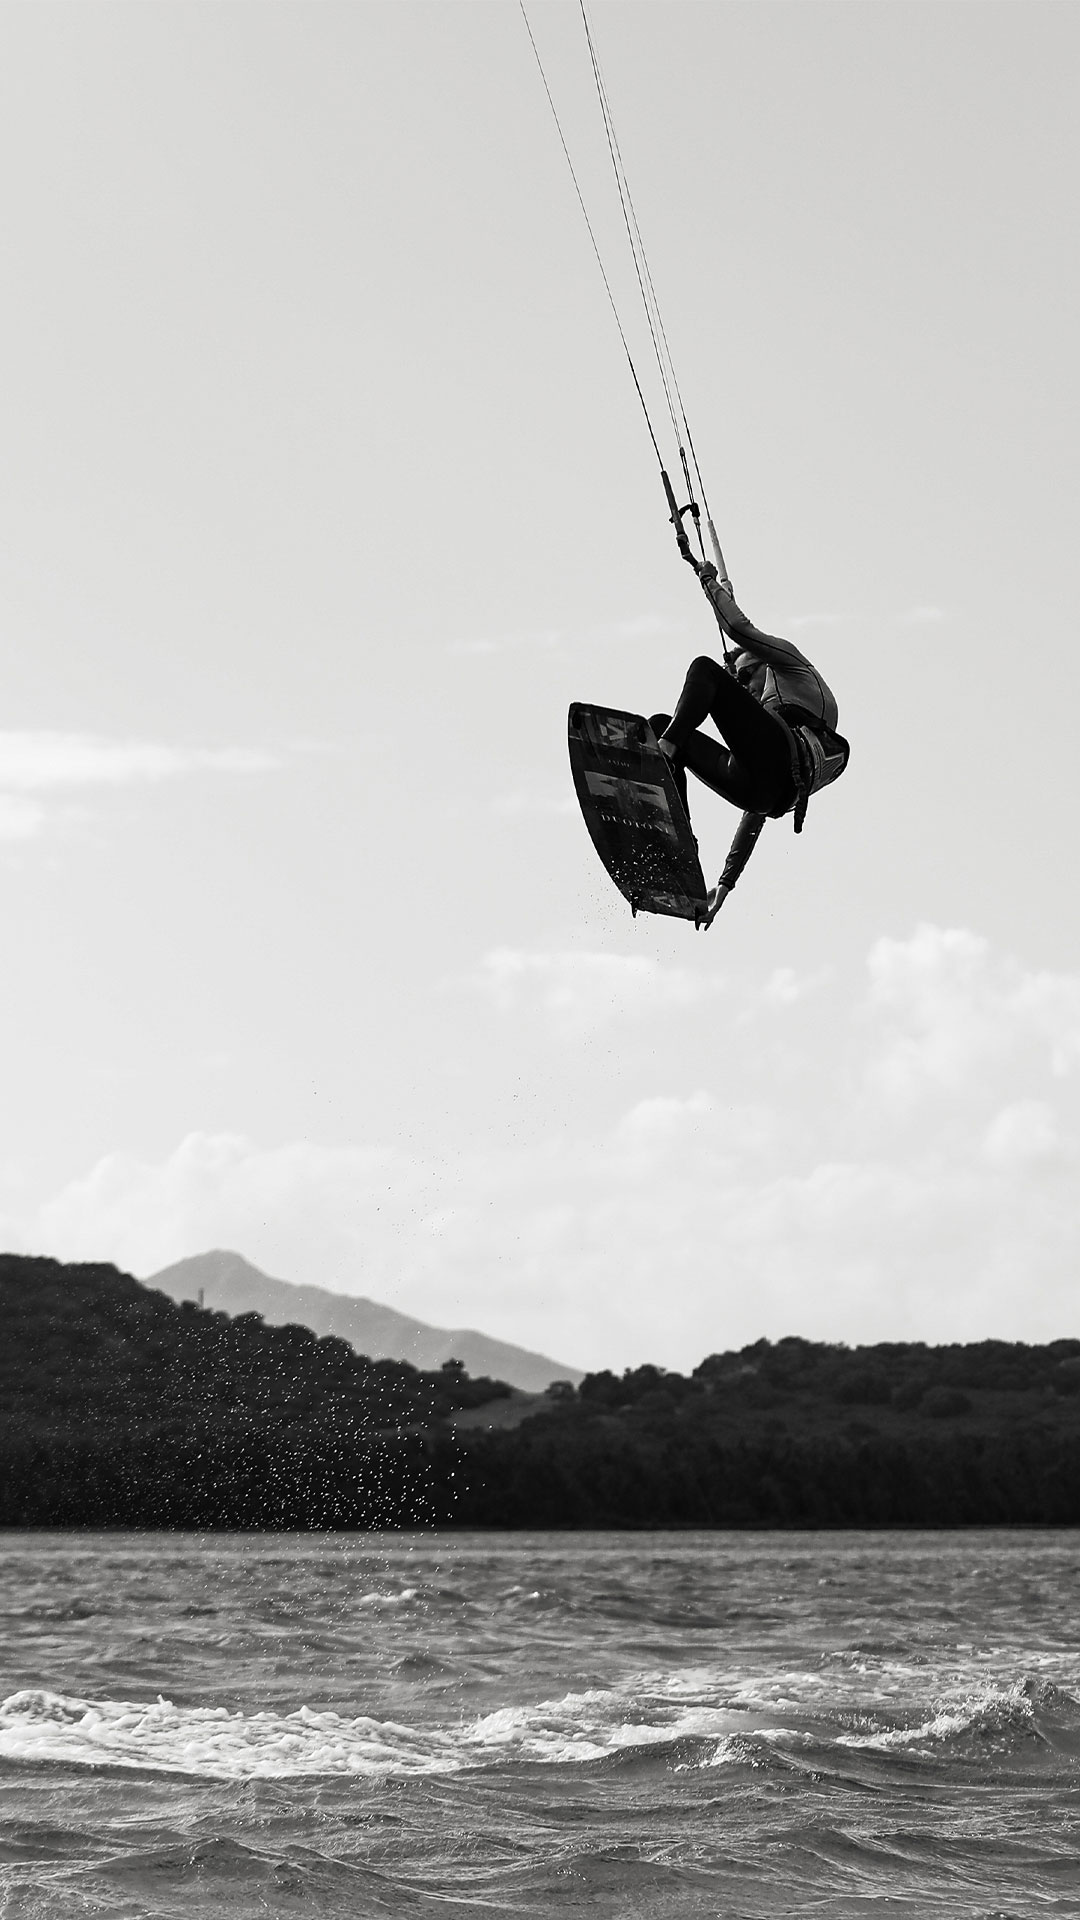 black and white picture about kitesurfer going down to the sky after doing a big jump with his kite